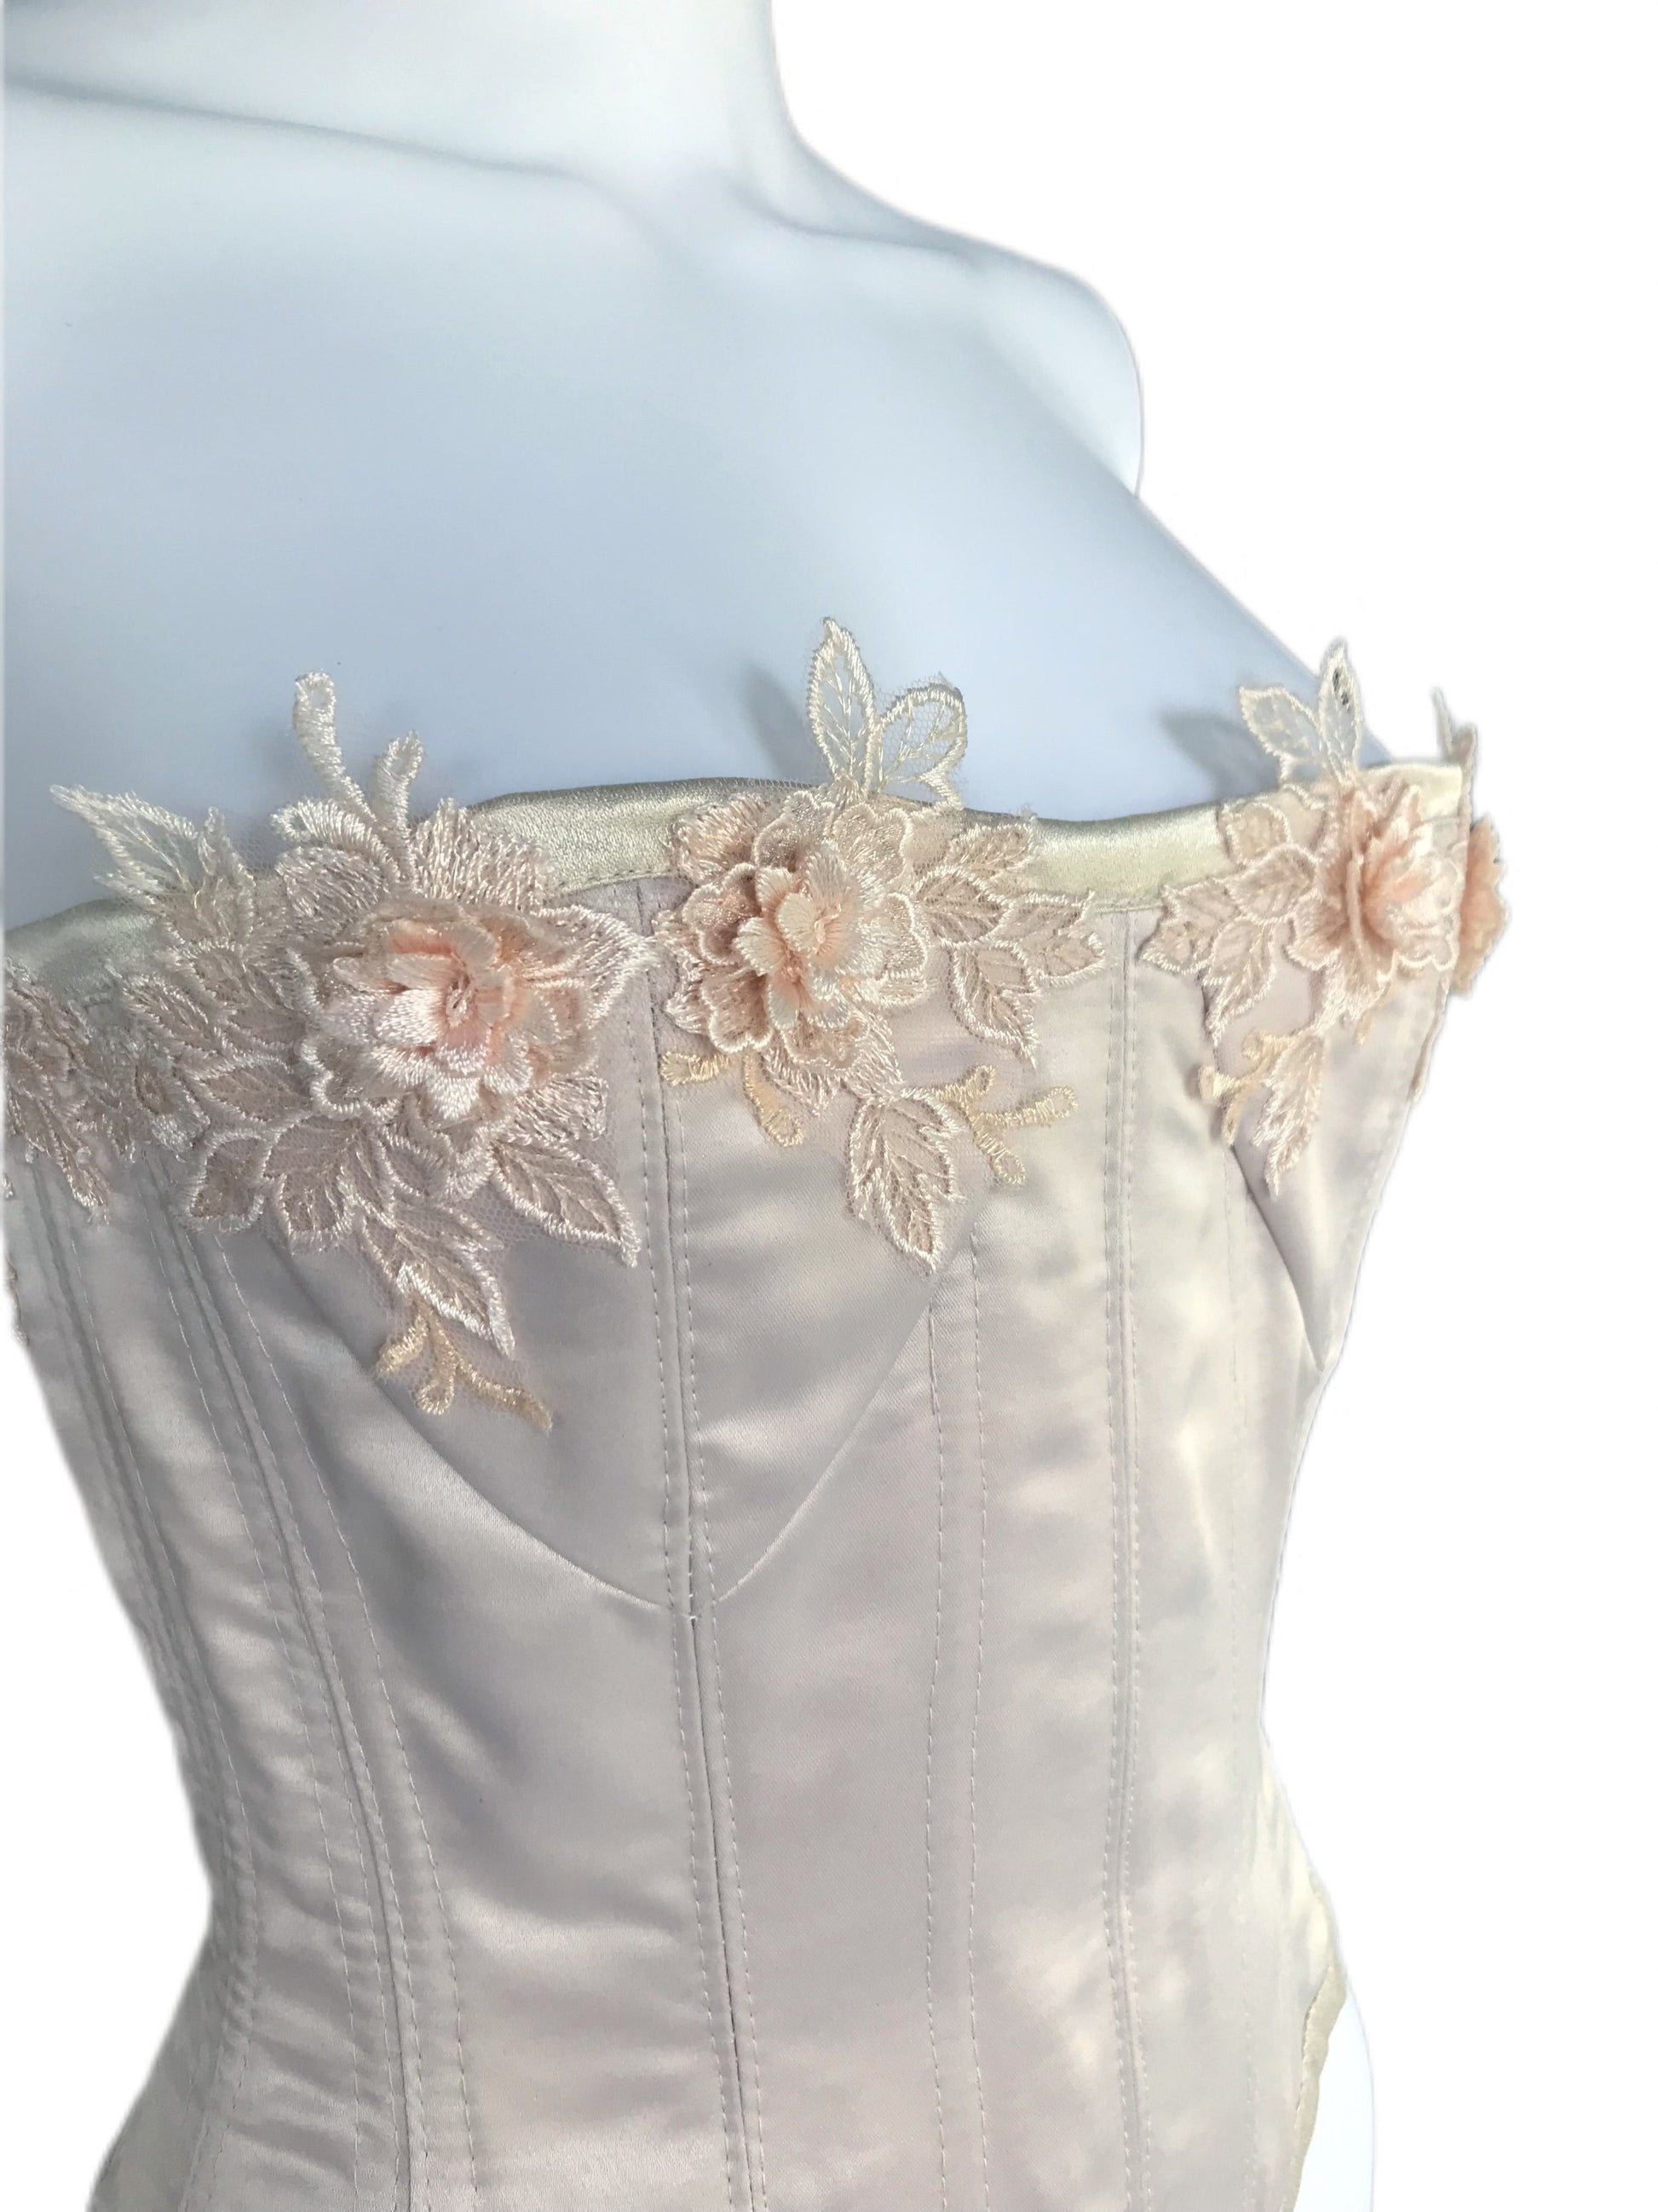 Satin and Lace Women's Corset - Ivory and Peach - Size Xs/Sm